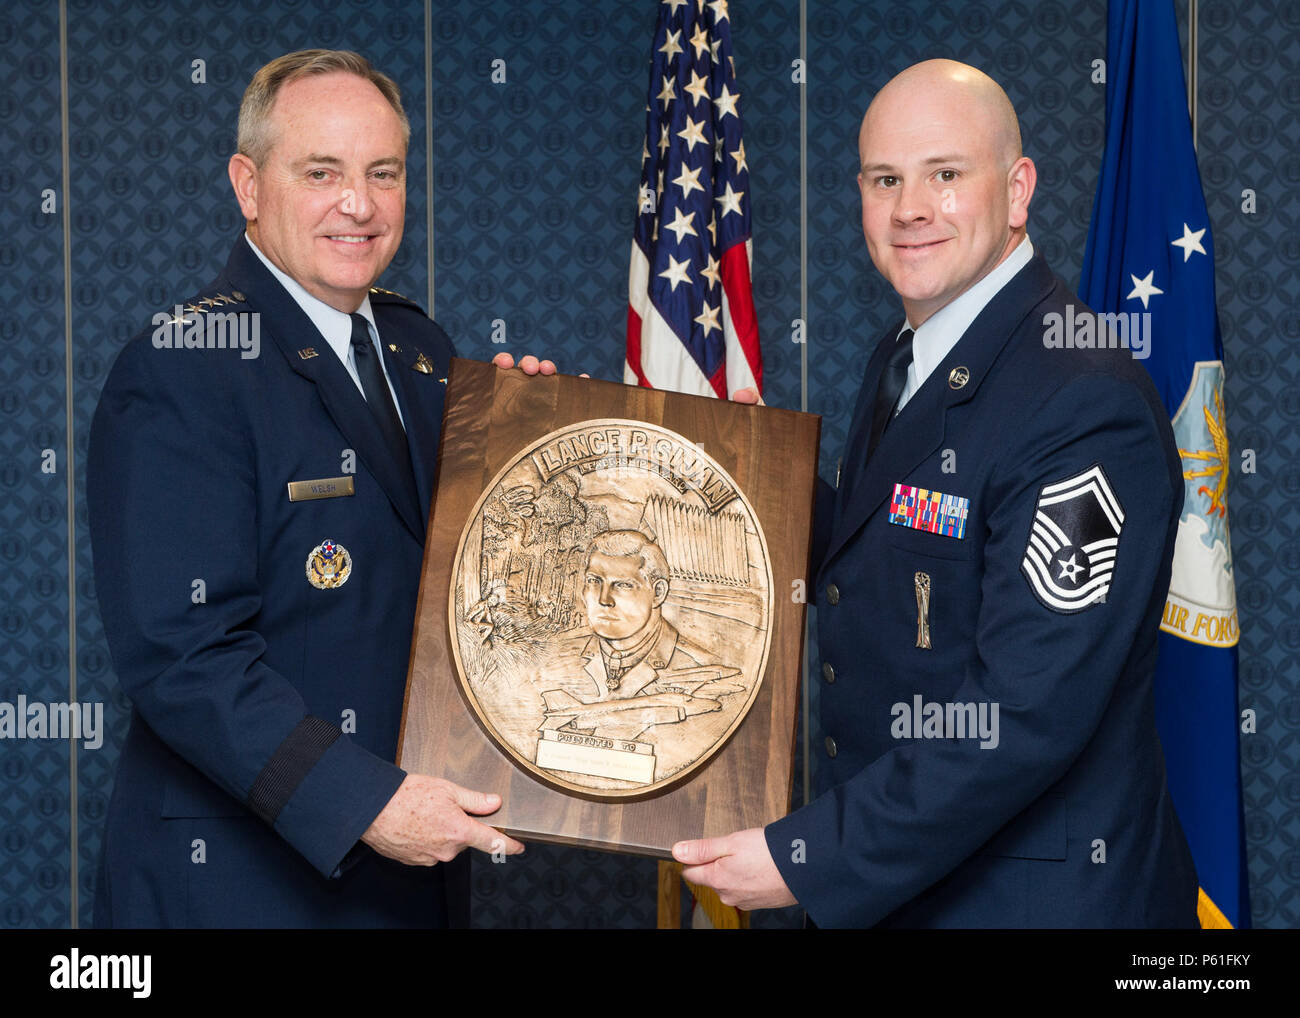 Air Force Chief of Staff Gen. Mark. A Welsh III presents the Lance P. Sijan Leadership award to Senior Master Sgt. Justin Deisch, a 2015 recipient, during a ceremony in the Pentagon, Washington. D.C., April 7, 2016. Deisch was a material flight chief assigned to the 705 munitions squadron, 5th maintenance group, 5th bomb wing, Minot Air Force Base, N.D., led 103 personnel across the only munitions squadron supporting the nuclear triad. The Sijan award, first presented in 1981, was named in honor of the first Air Force Academy graduate to receive the Congressional Medal of Honor. Each year it i Stock Photo